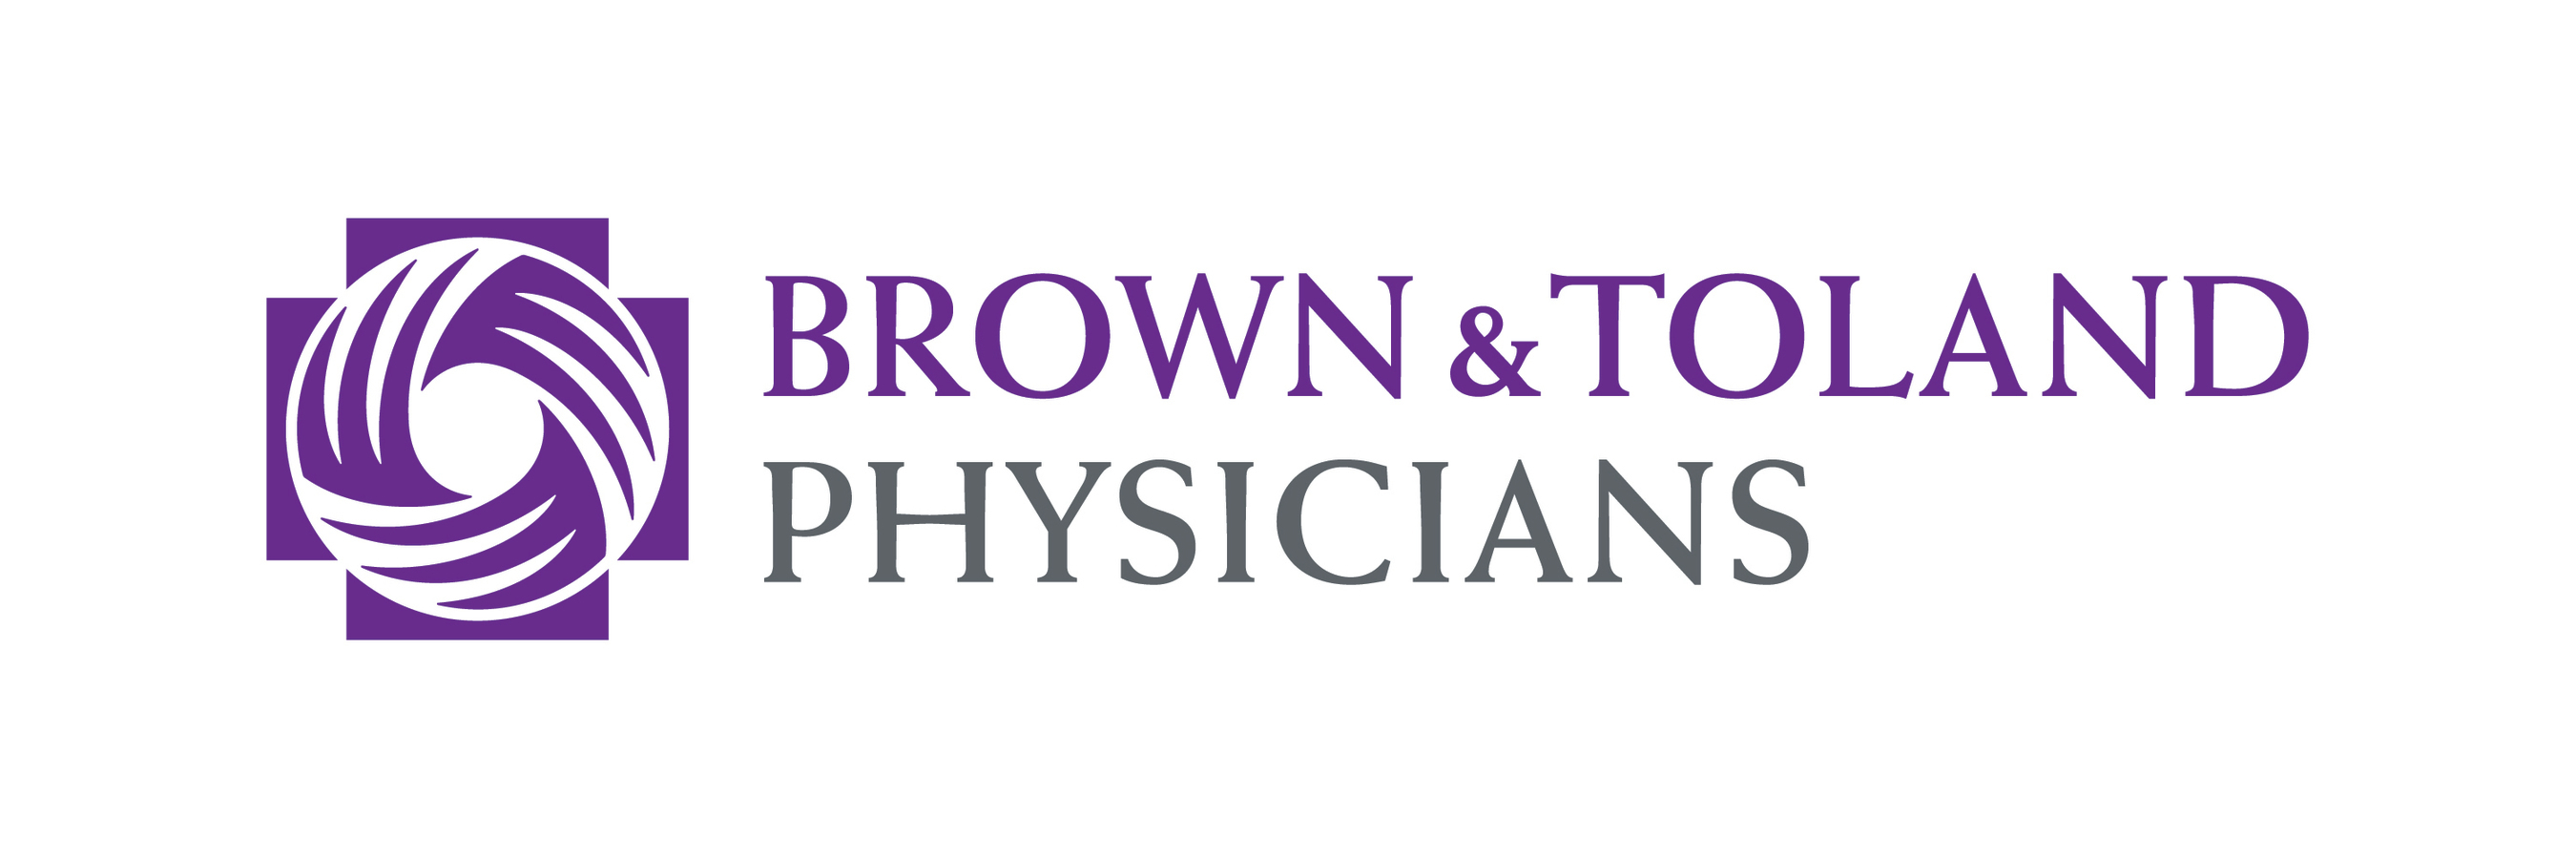 Brown & Toland Physicians